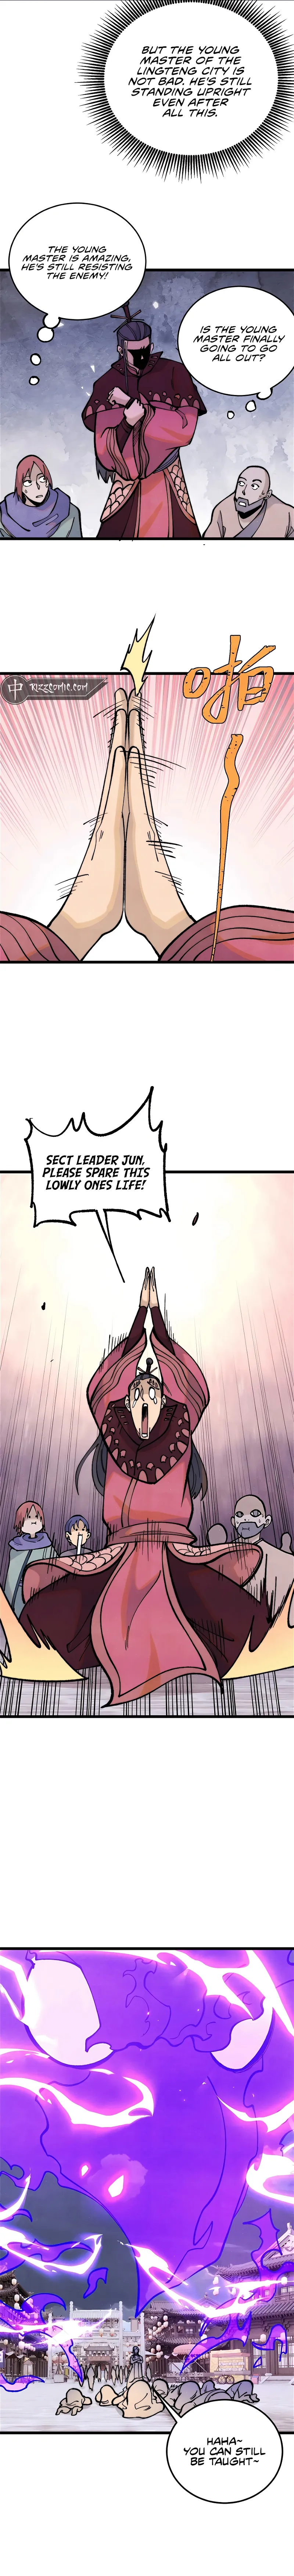 All Hail The Sect Leader Chapter 283 page 8